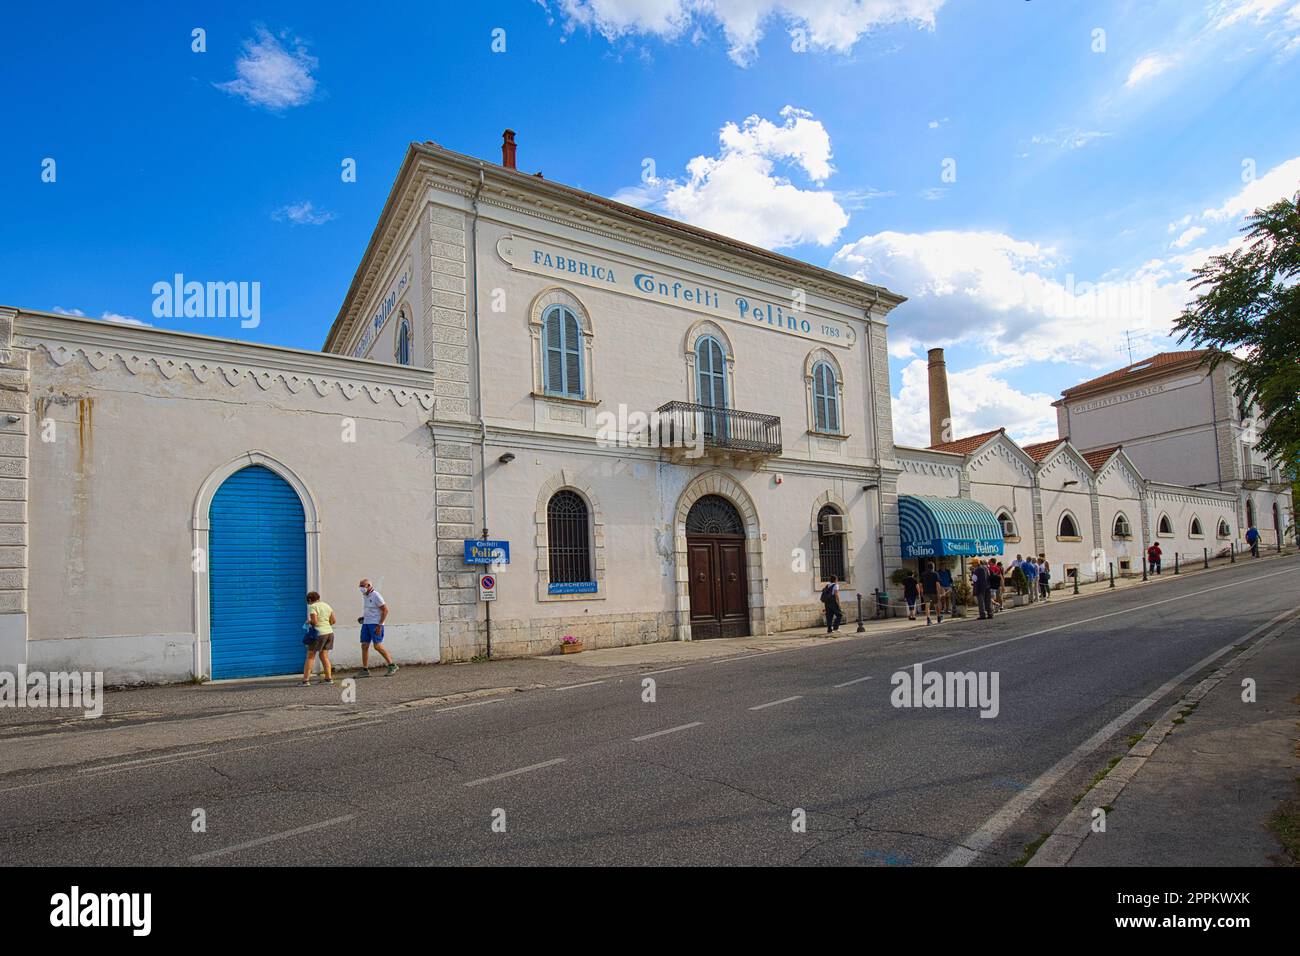 Sulmona, L`Aquila, Italy - 23 August 2022: Confetti Mario Pelino was founded in 1783 by Bernardino Pelino and is one of the oldest confectioneries in Italy. Stock Photo